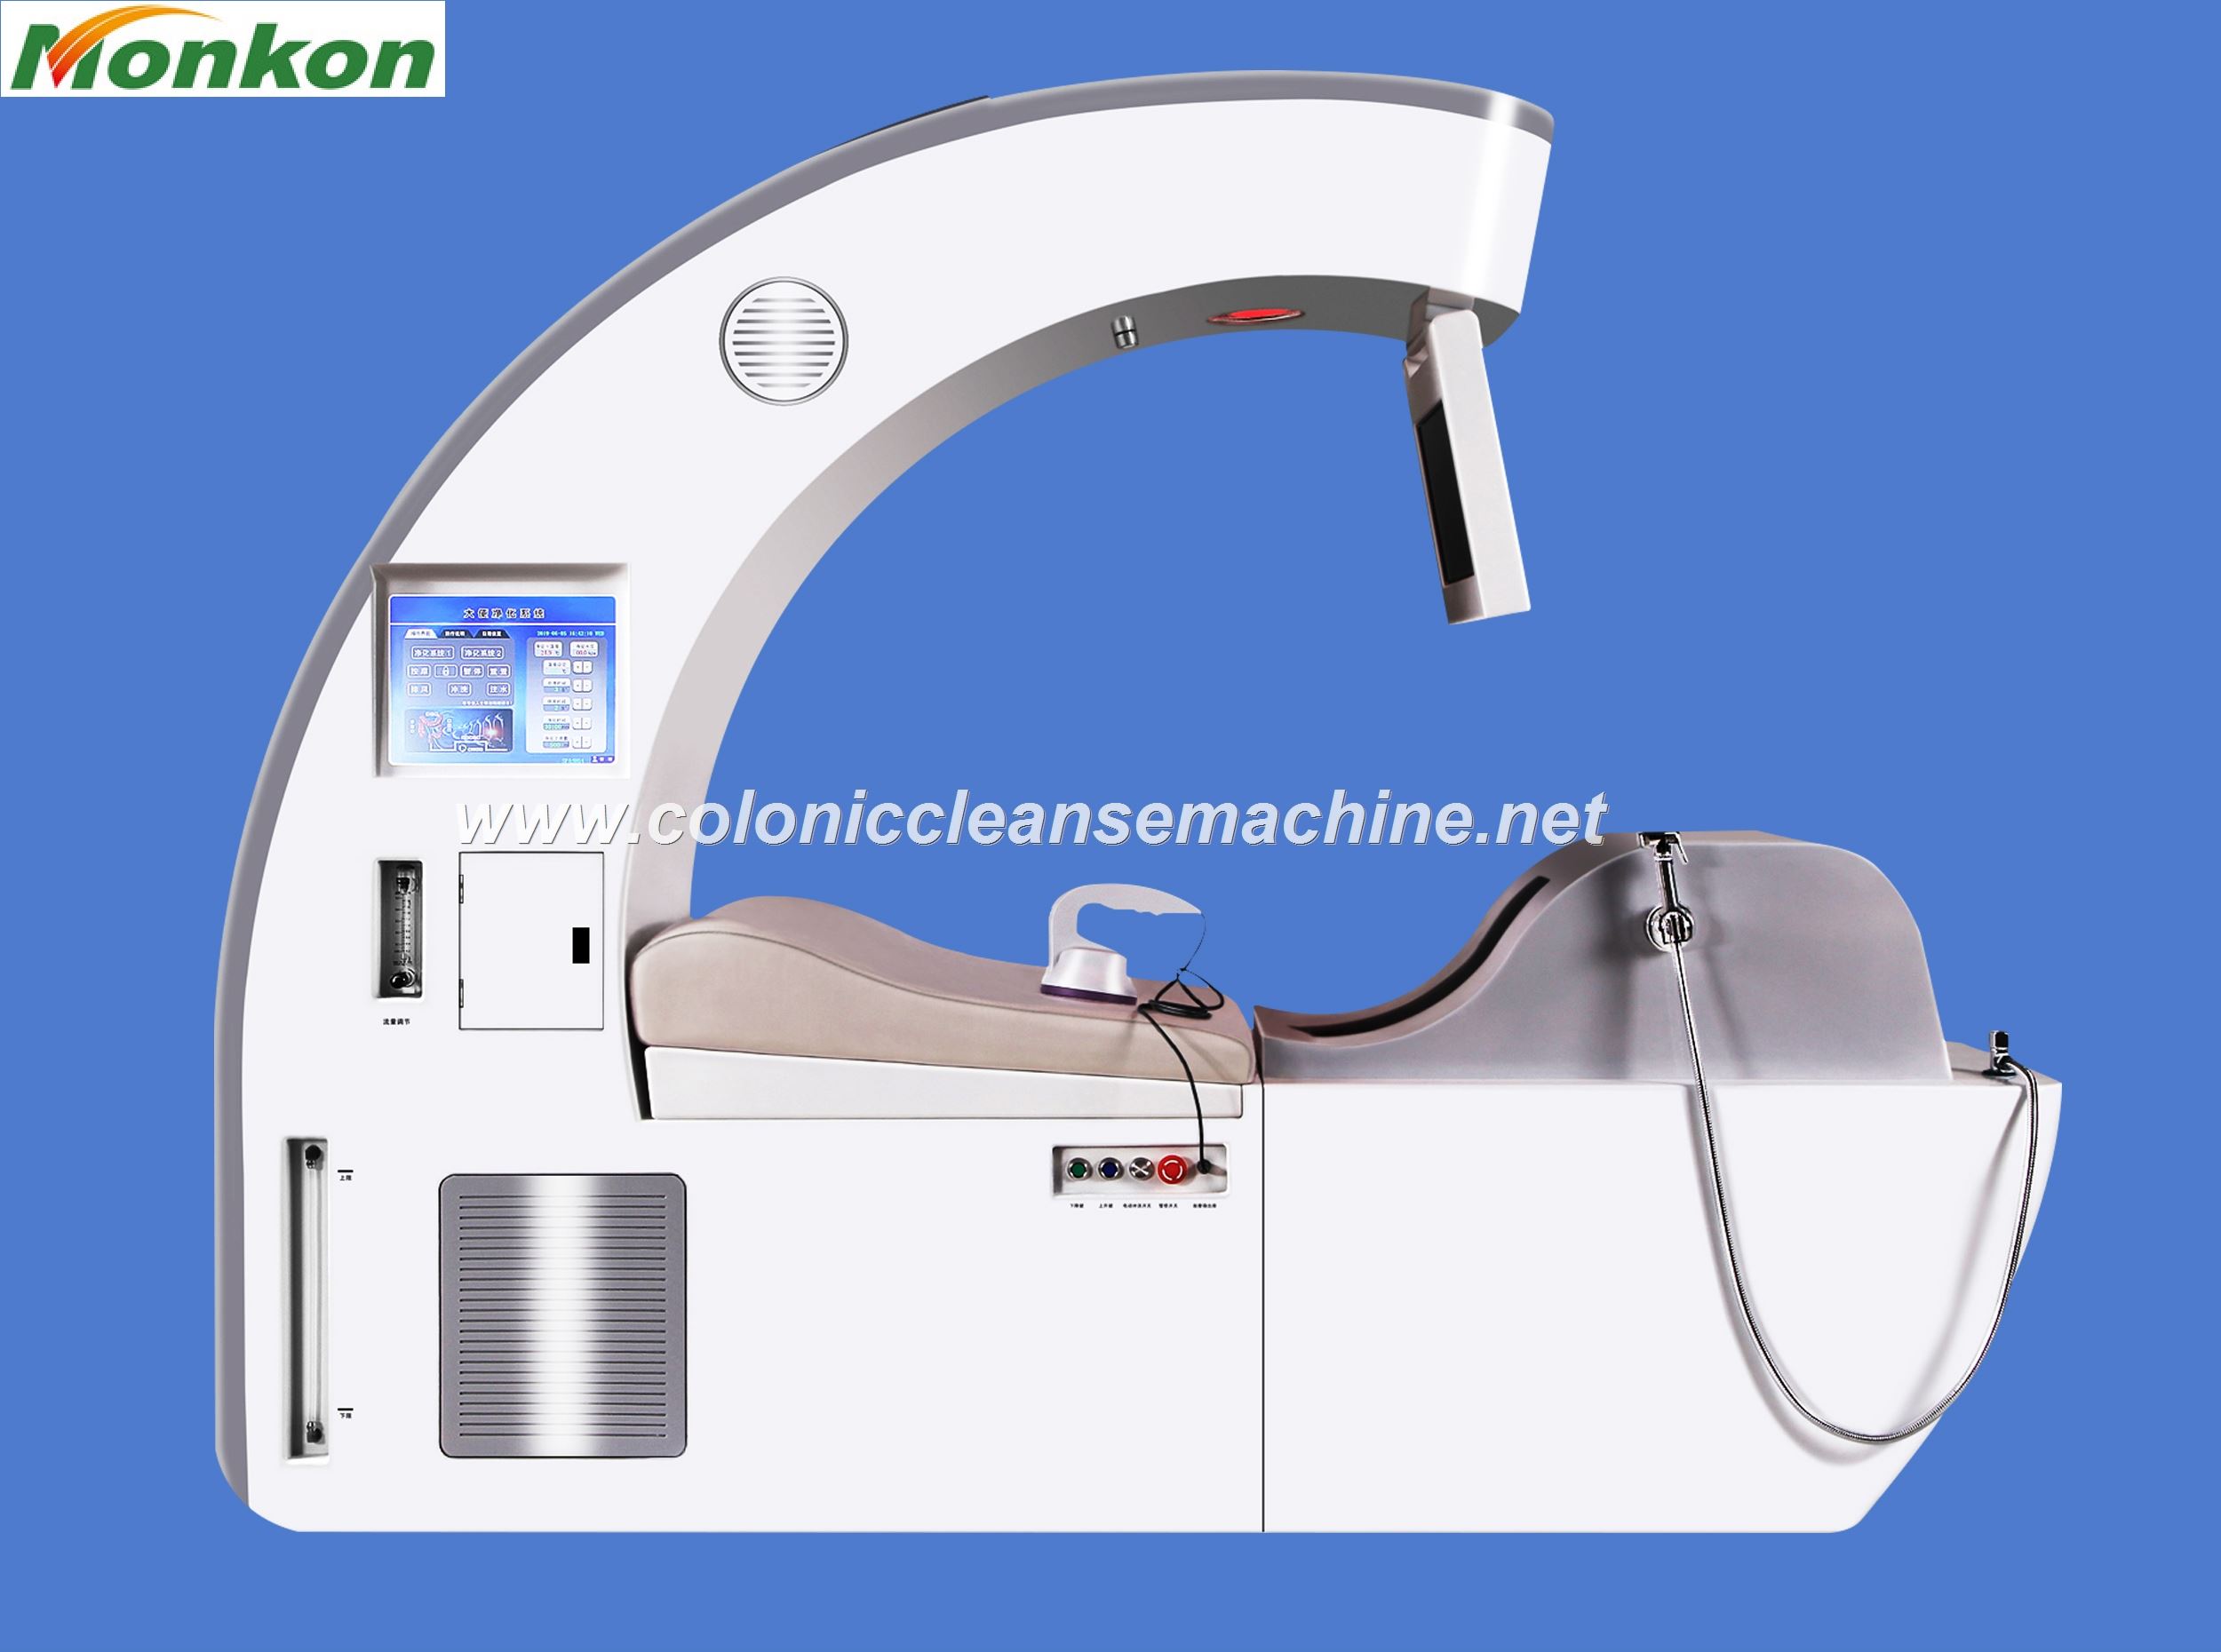 Navigating the Landscape of Colonic Machine Prices